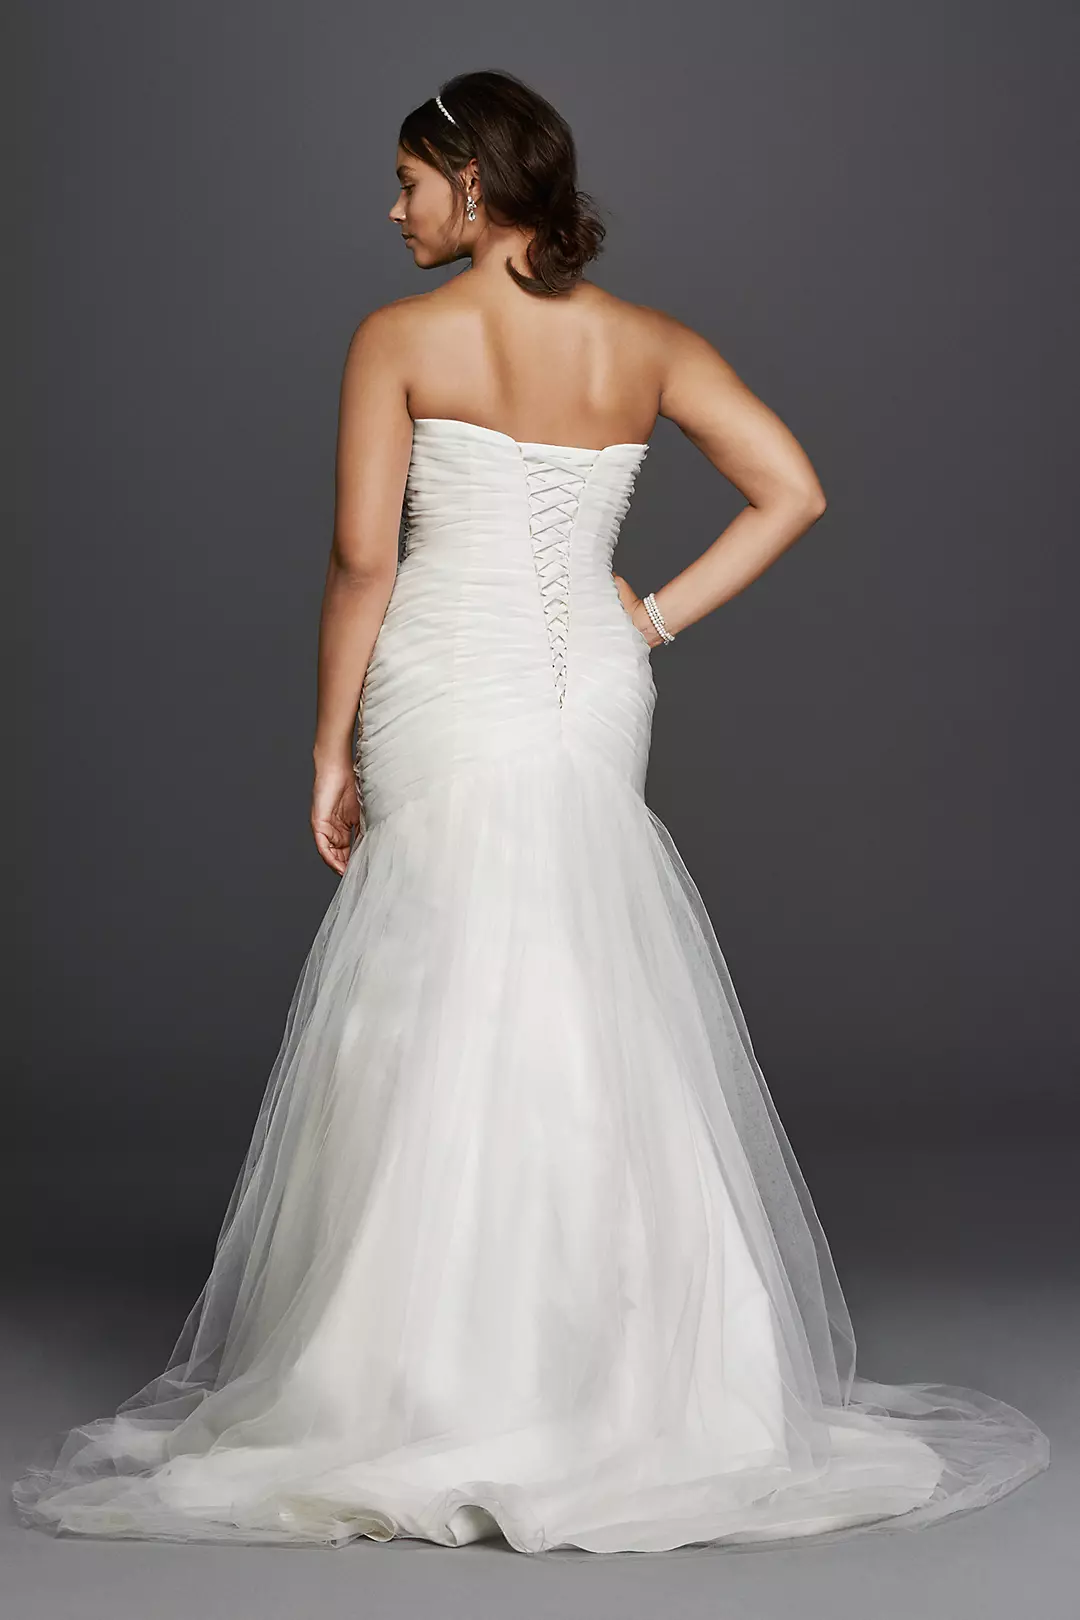 Strapless Ruched Mermaid Tulle Wedding Dress Image 2